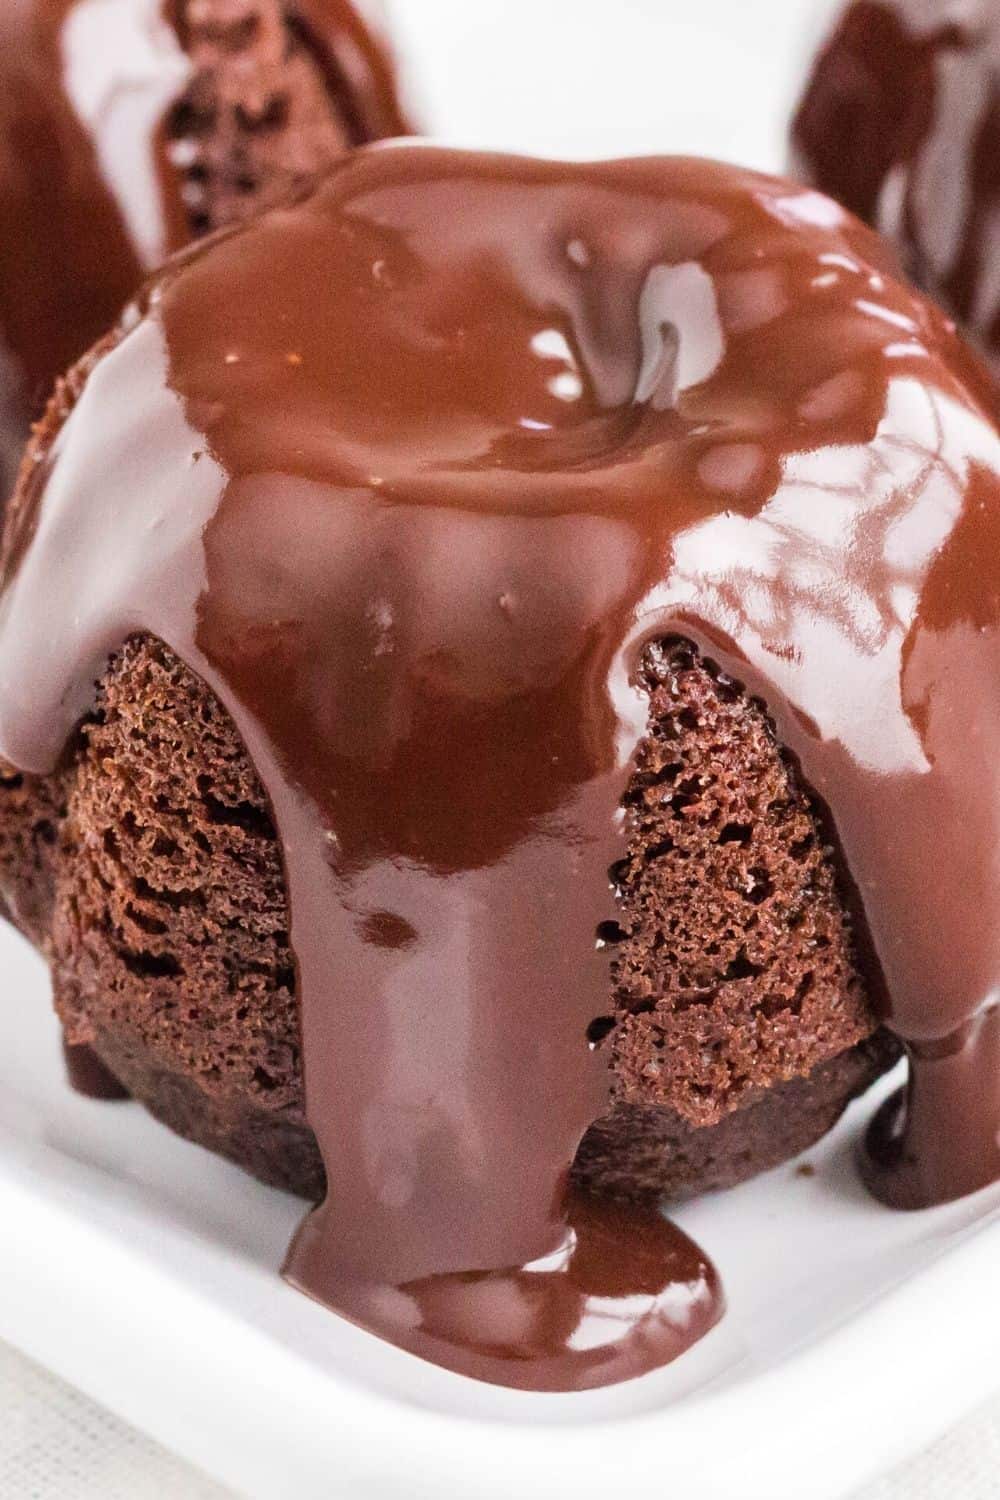 chocolate ganache drips off of a mini chocolate bundtlet, similar to Nothing Bundt Cakes, served on a white plate